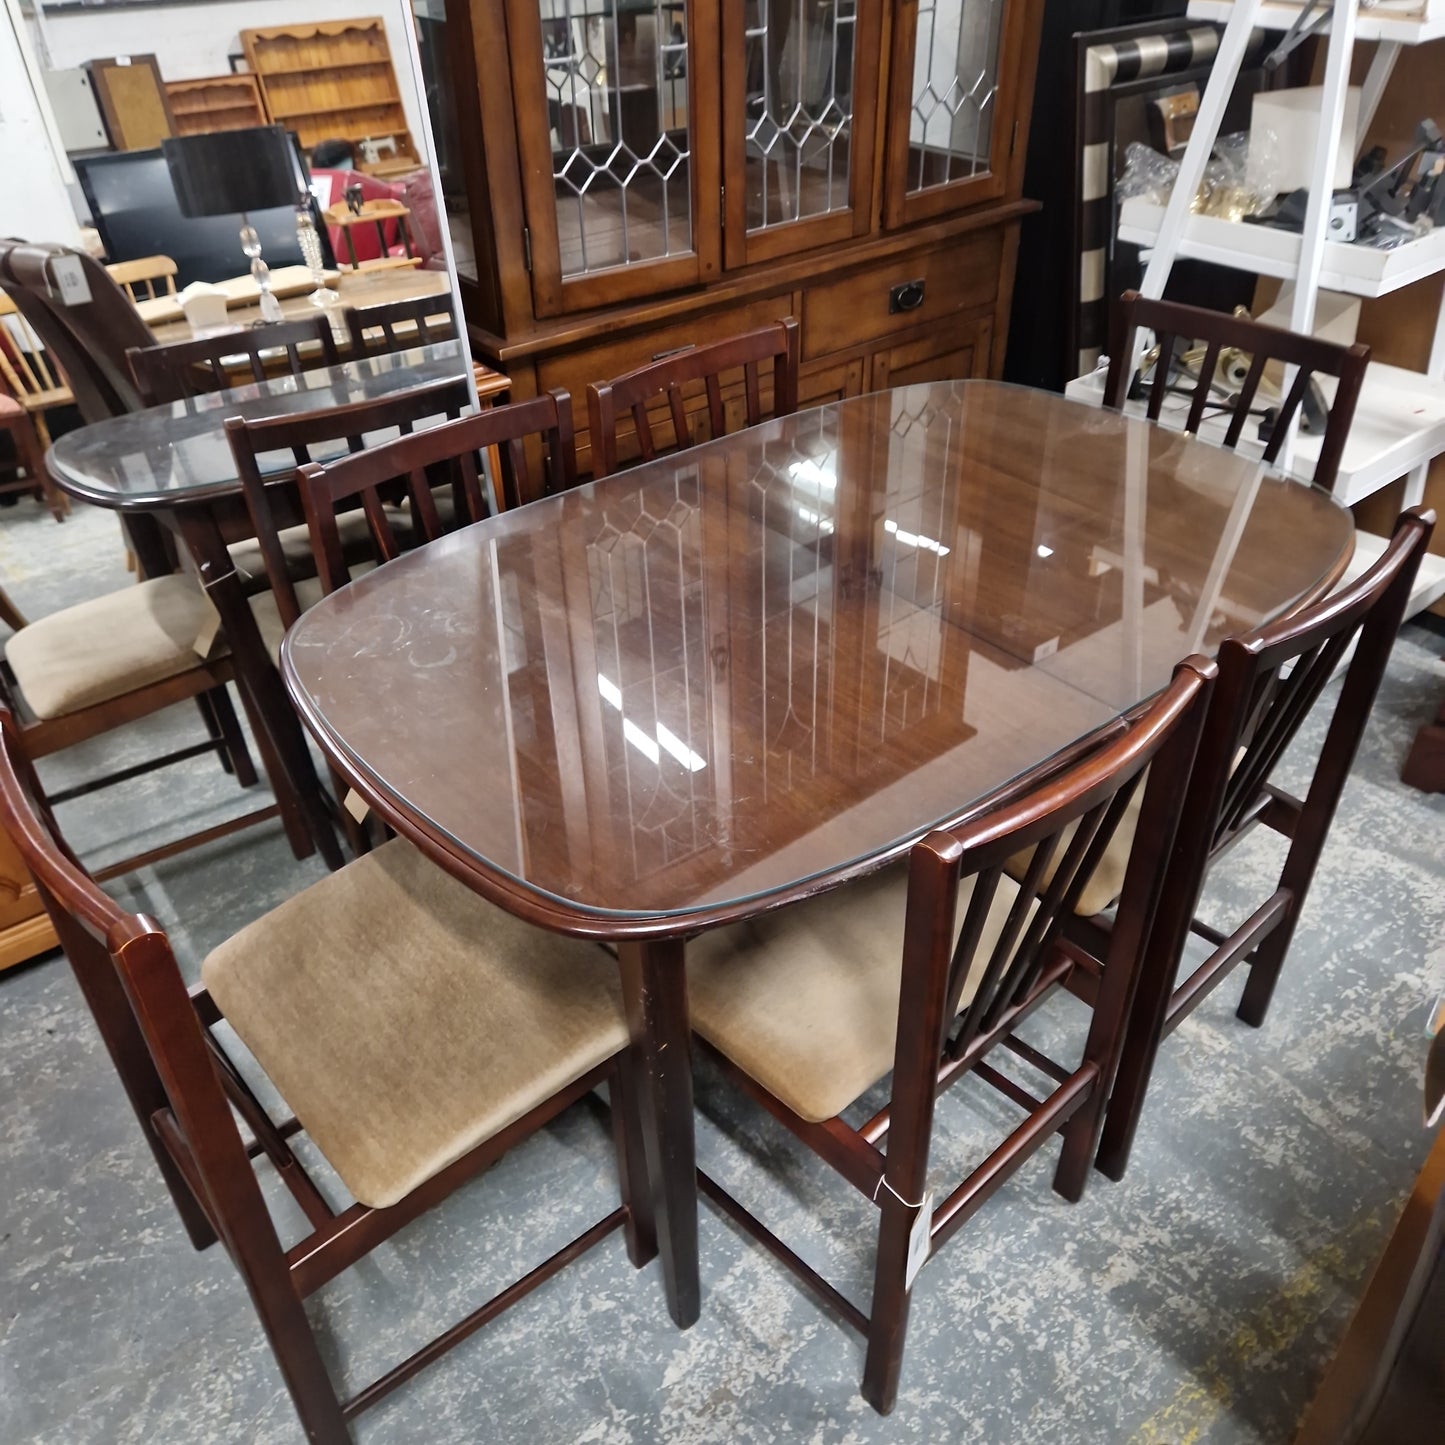 Glass top rossmore mahogany extendable kitchen table cw 6 no. matching chairs with fabric seat